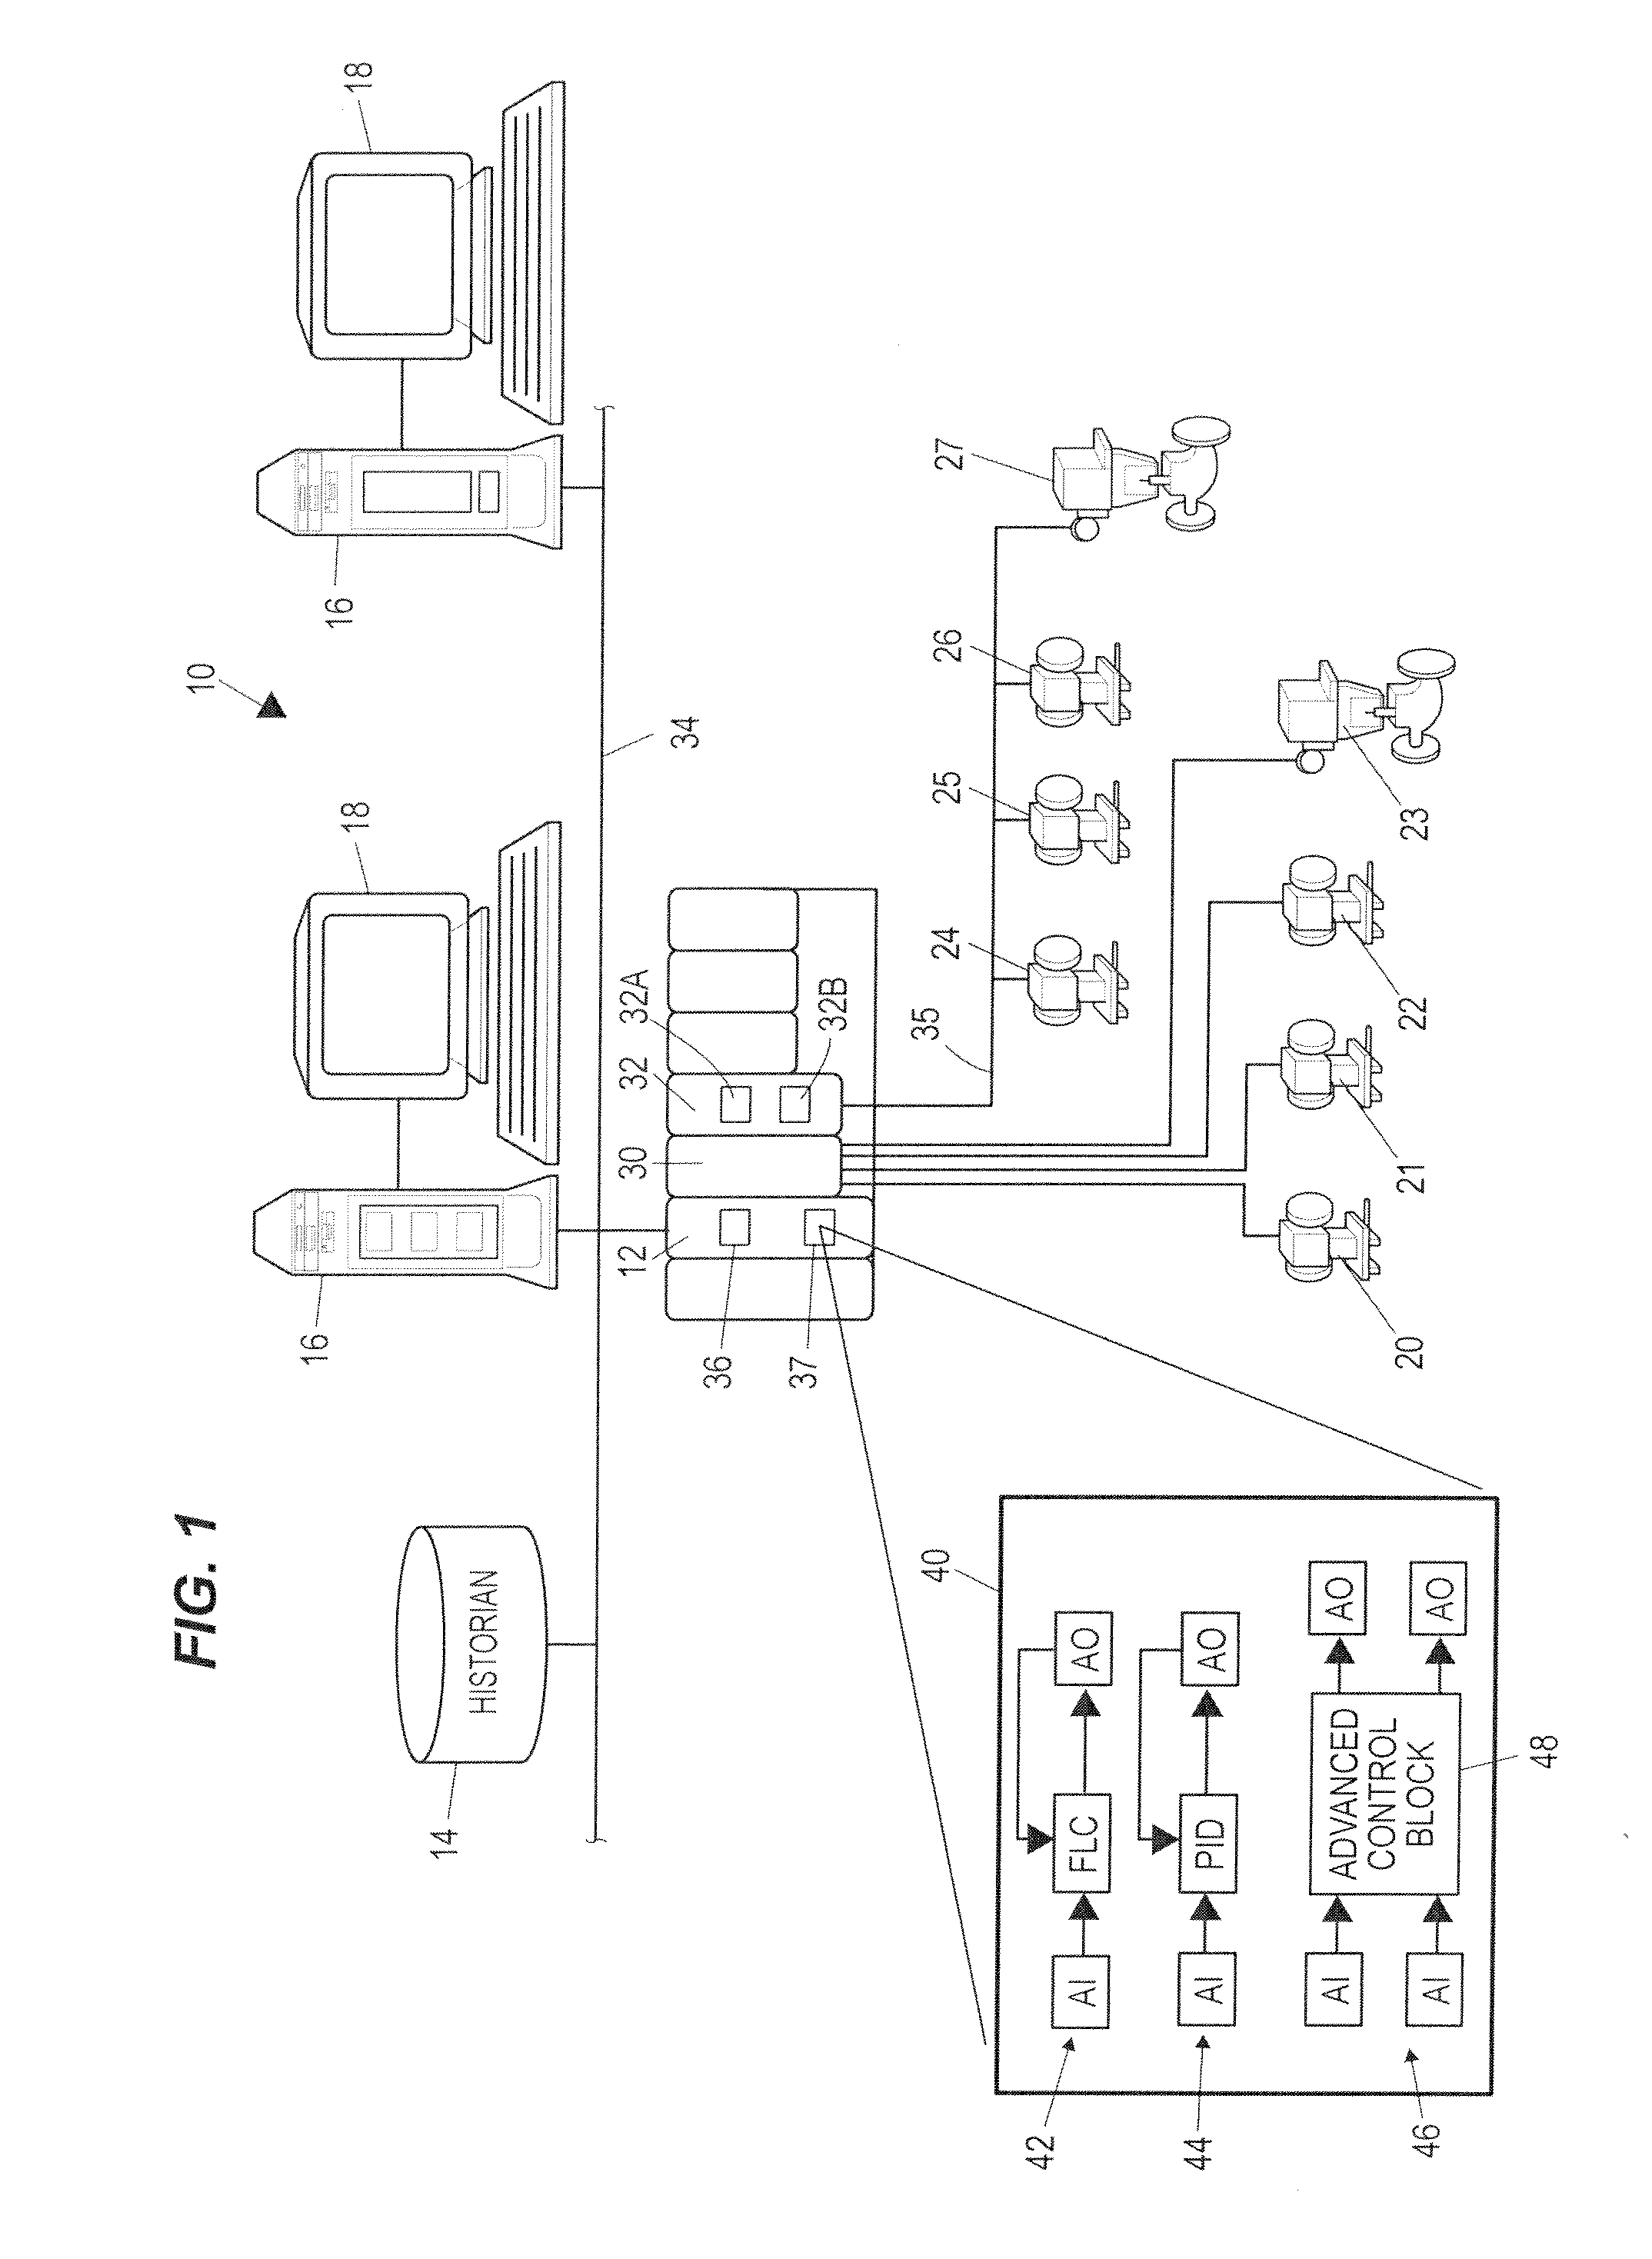 Integrated bus controller and power supply device for use in a process control system